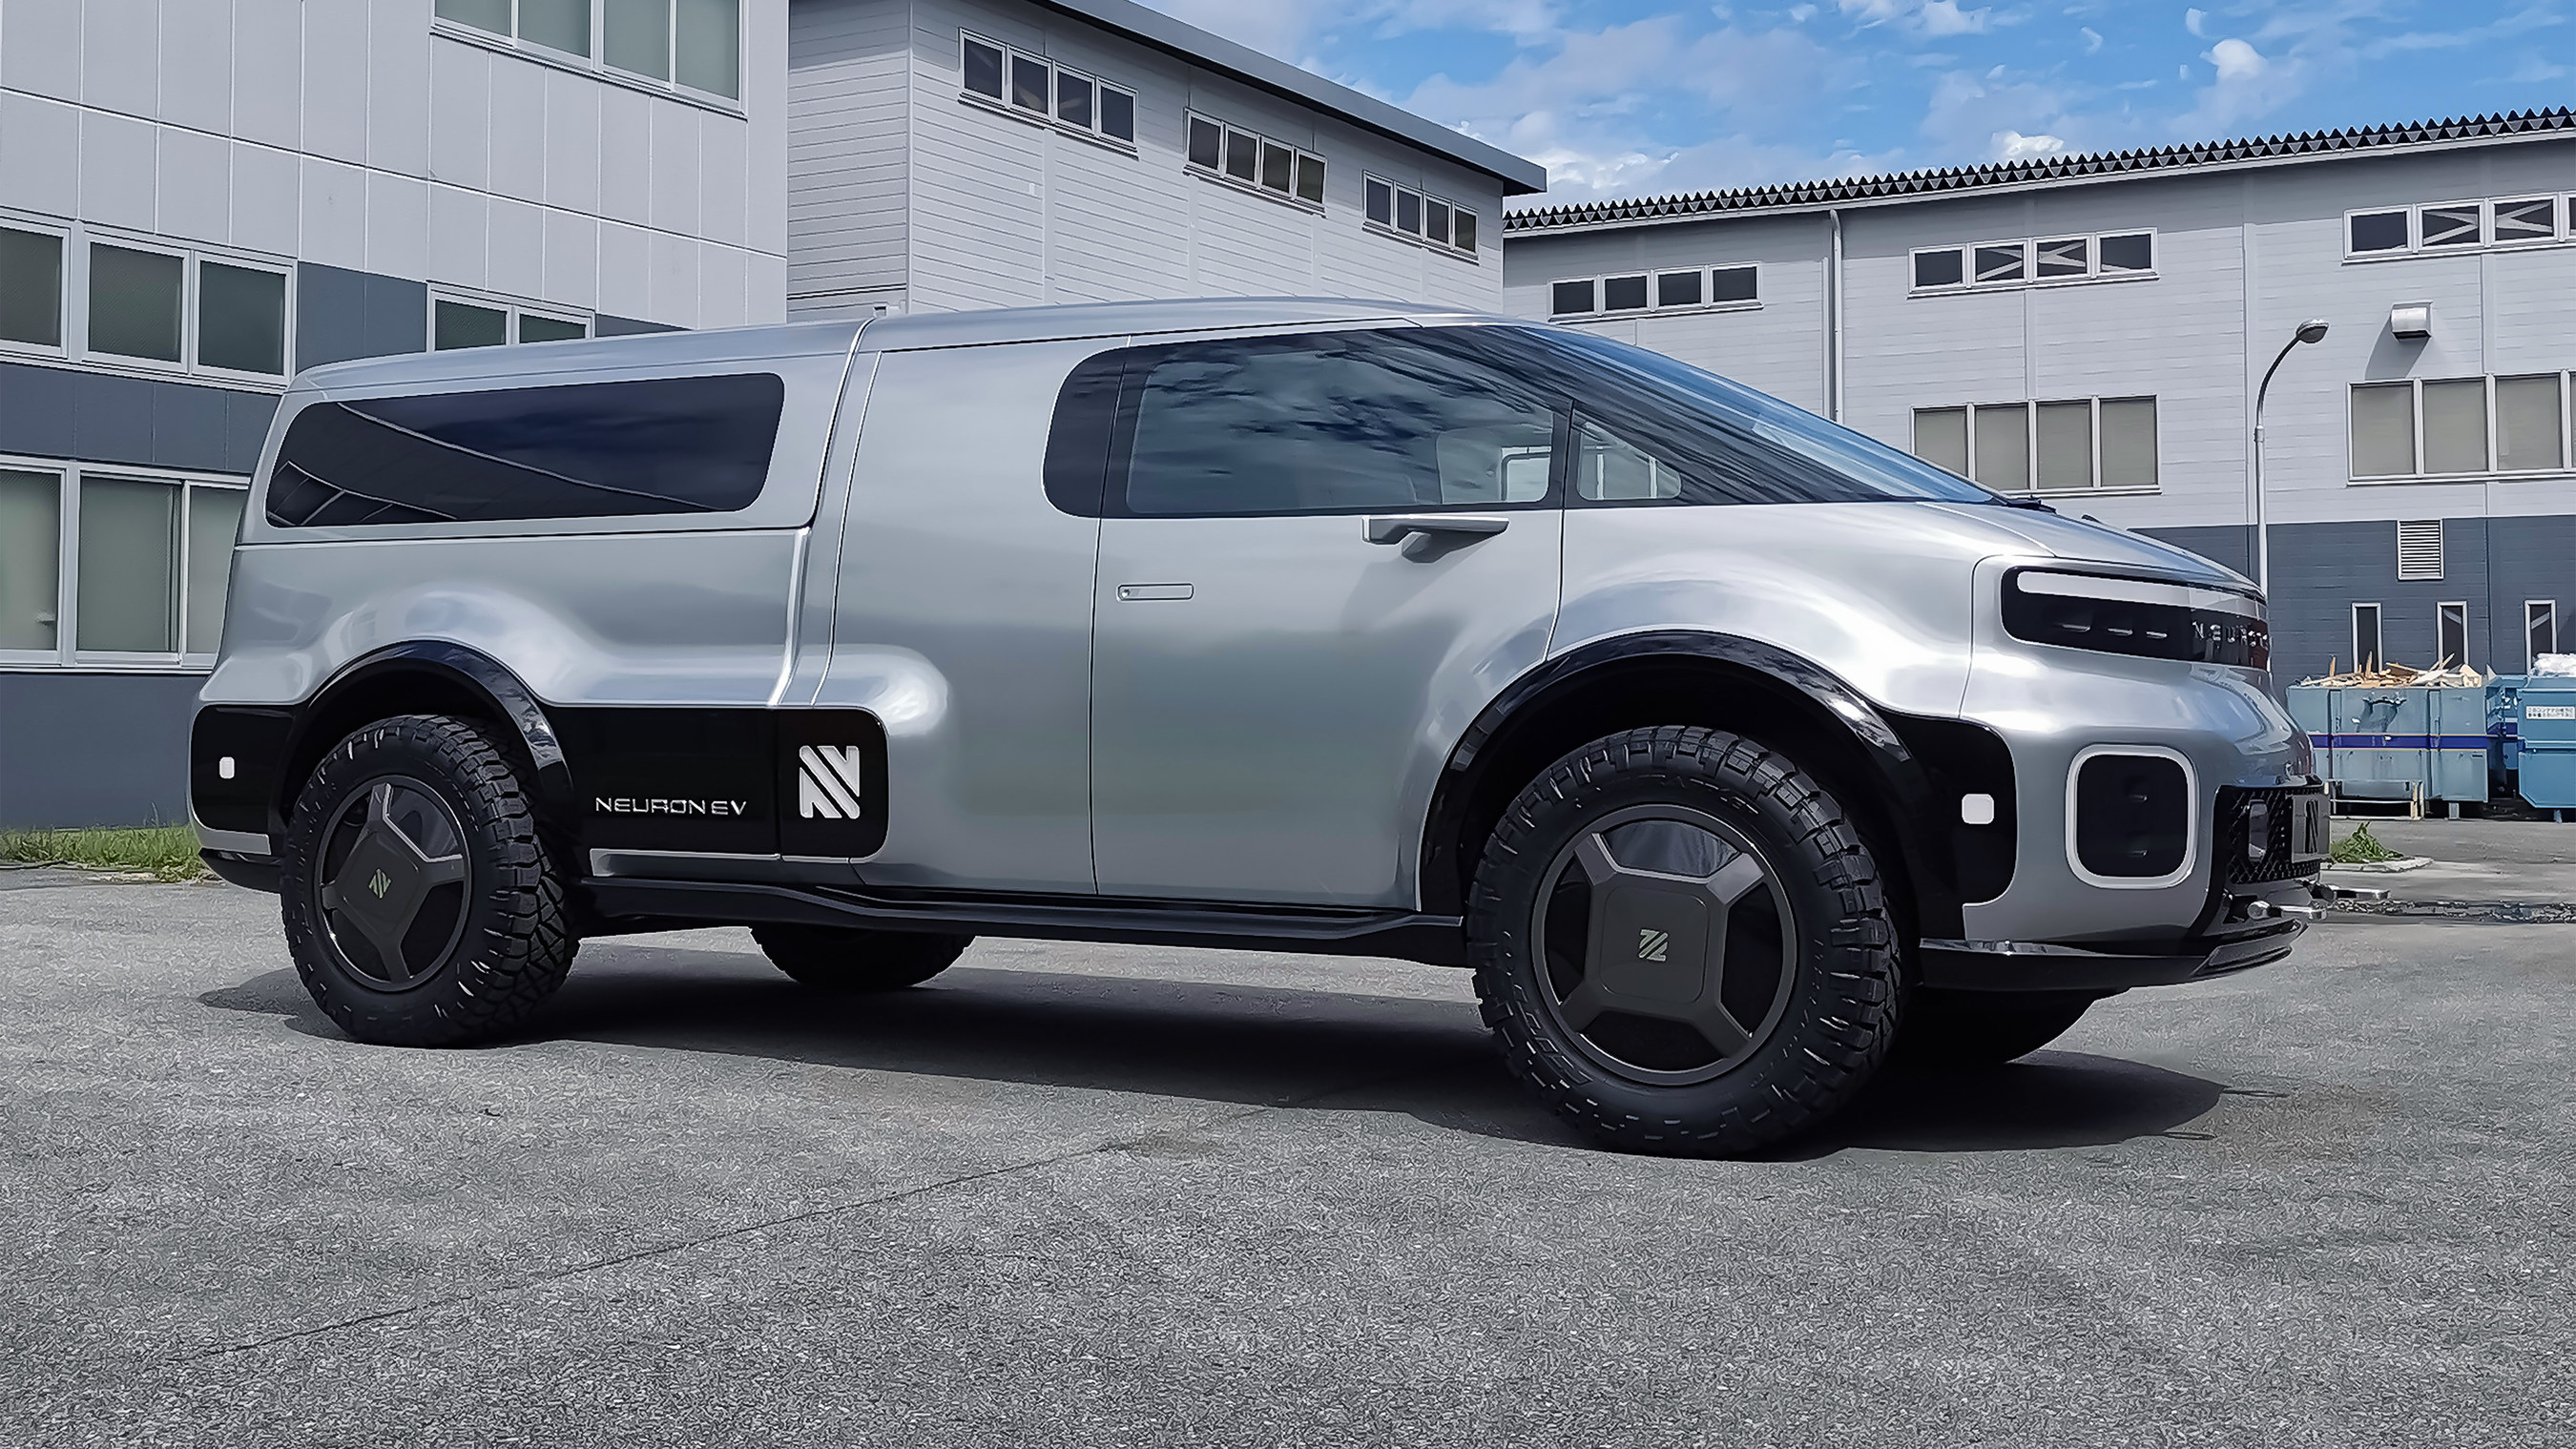 Neuron EV is a Californiabased company with an electric pickup, semi